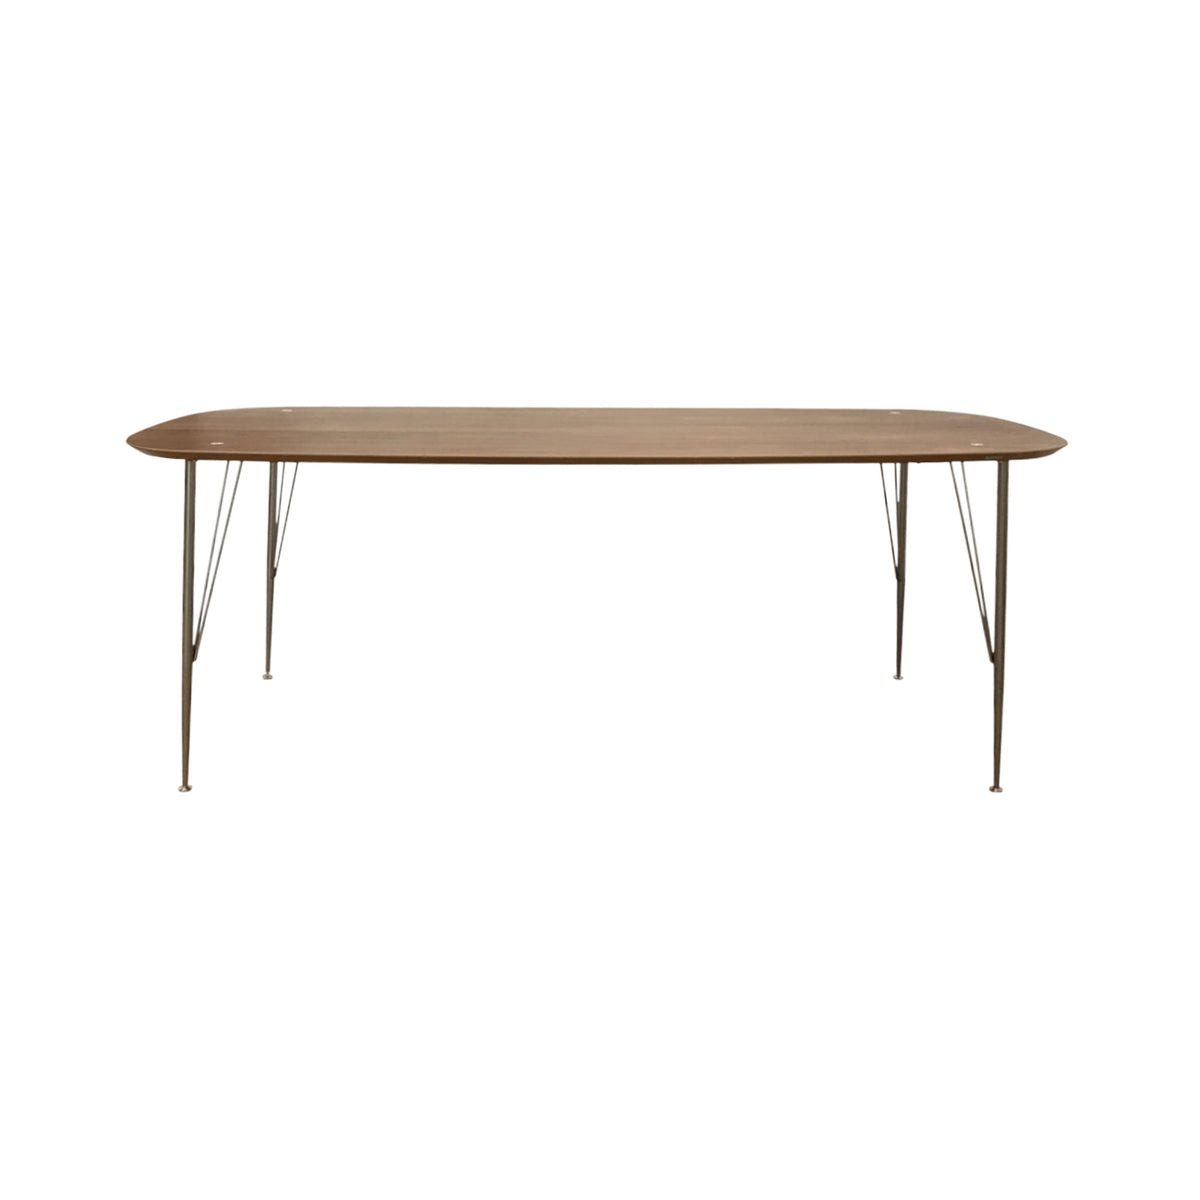 Zimano Walnut Dining Table With Silver Legs - 220cm - Notbrand